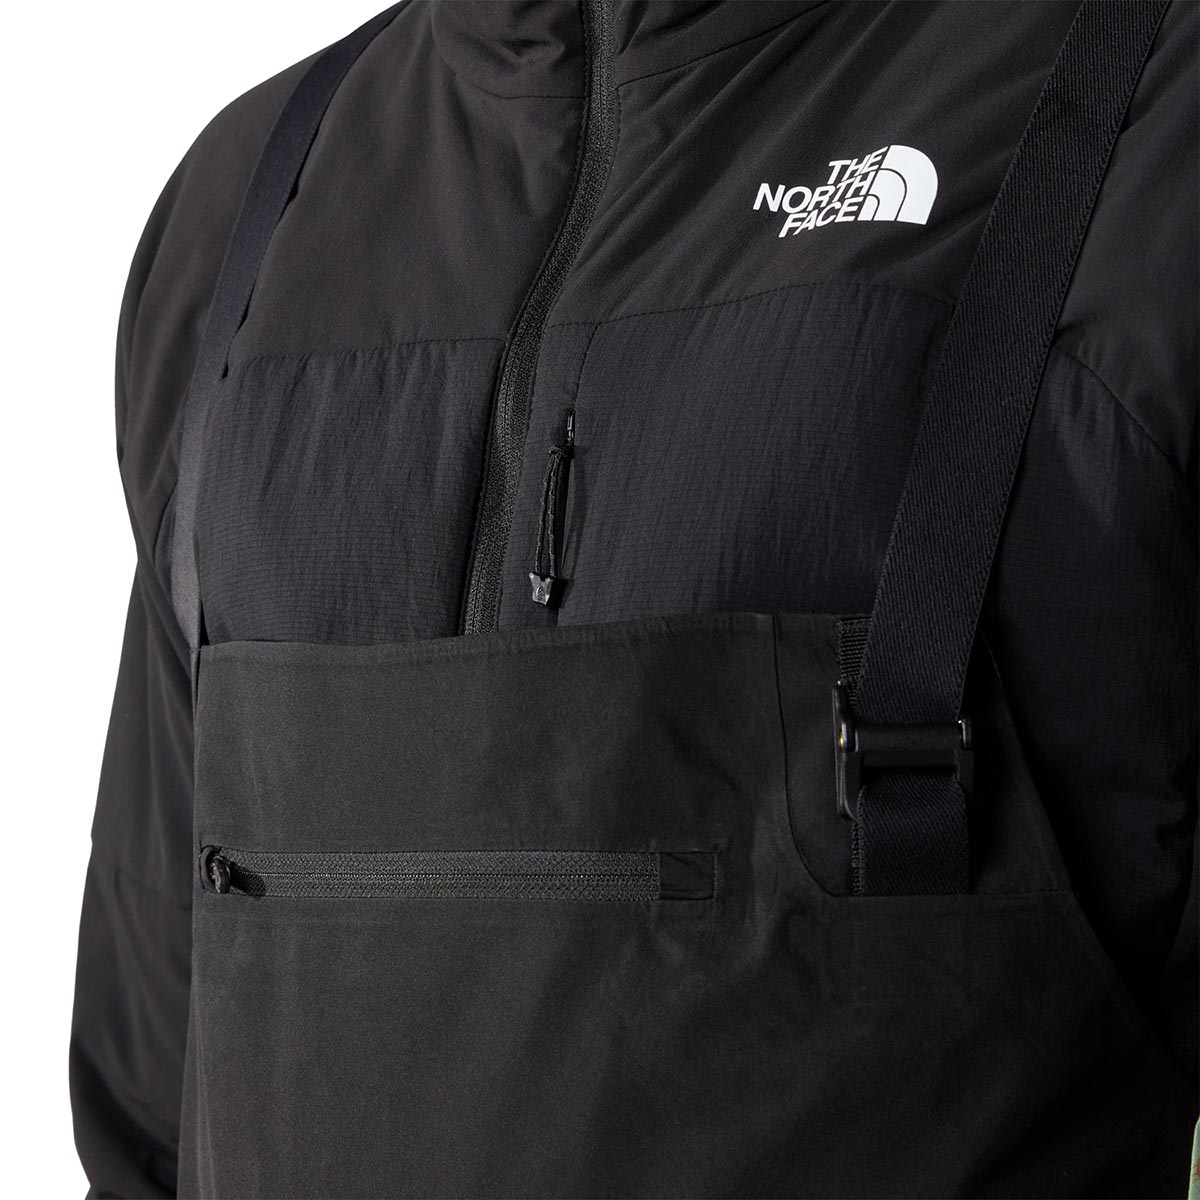 THE NORTH FACE - SUMMIT VERBIER GORE-TEX BIB TROUSERS